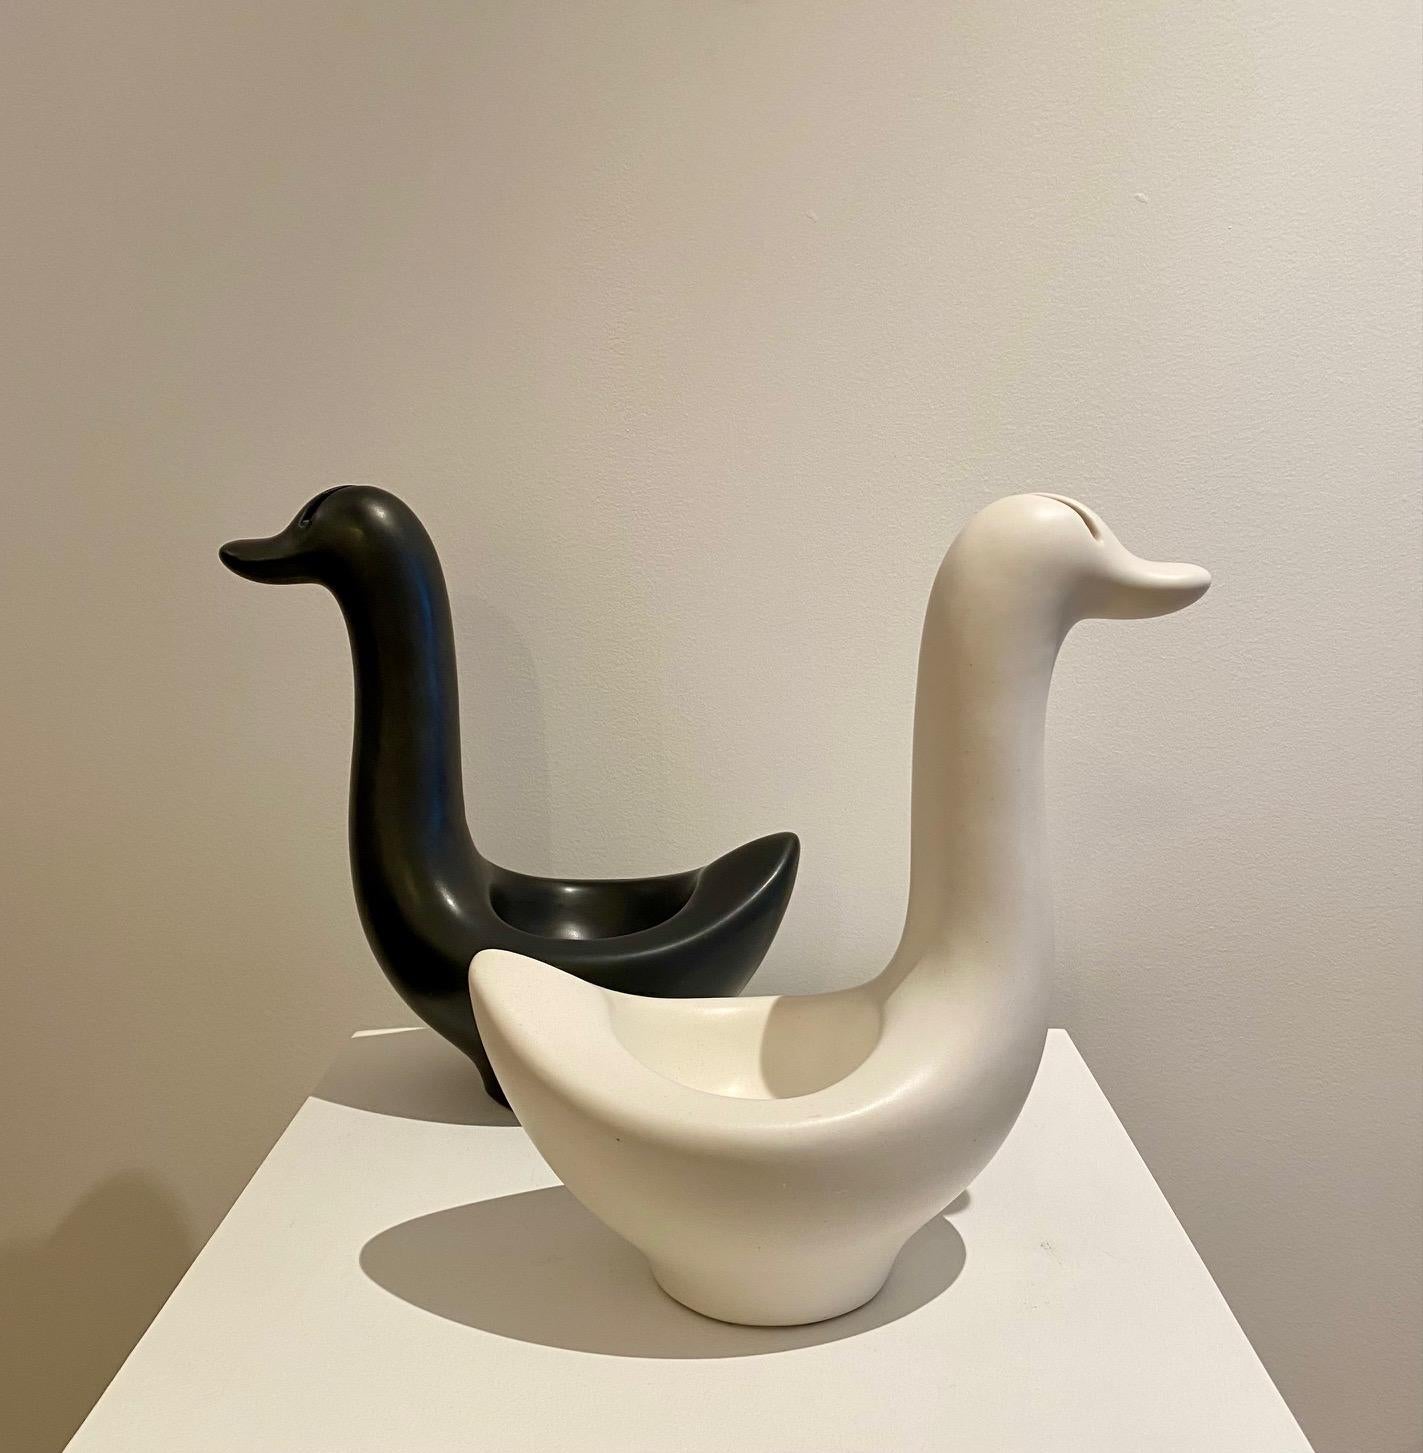 Ceramic Pair of Black and White Swans by André Baud, Vallauris, 1950s For Sale 1